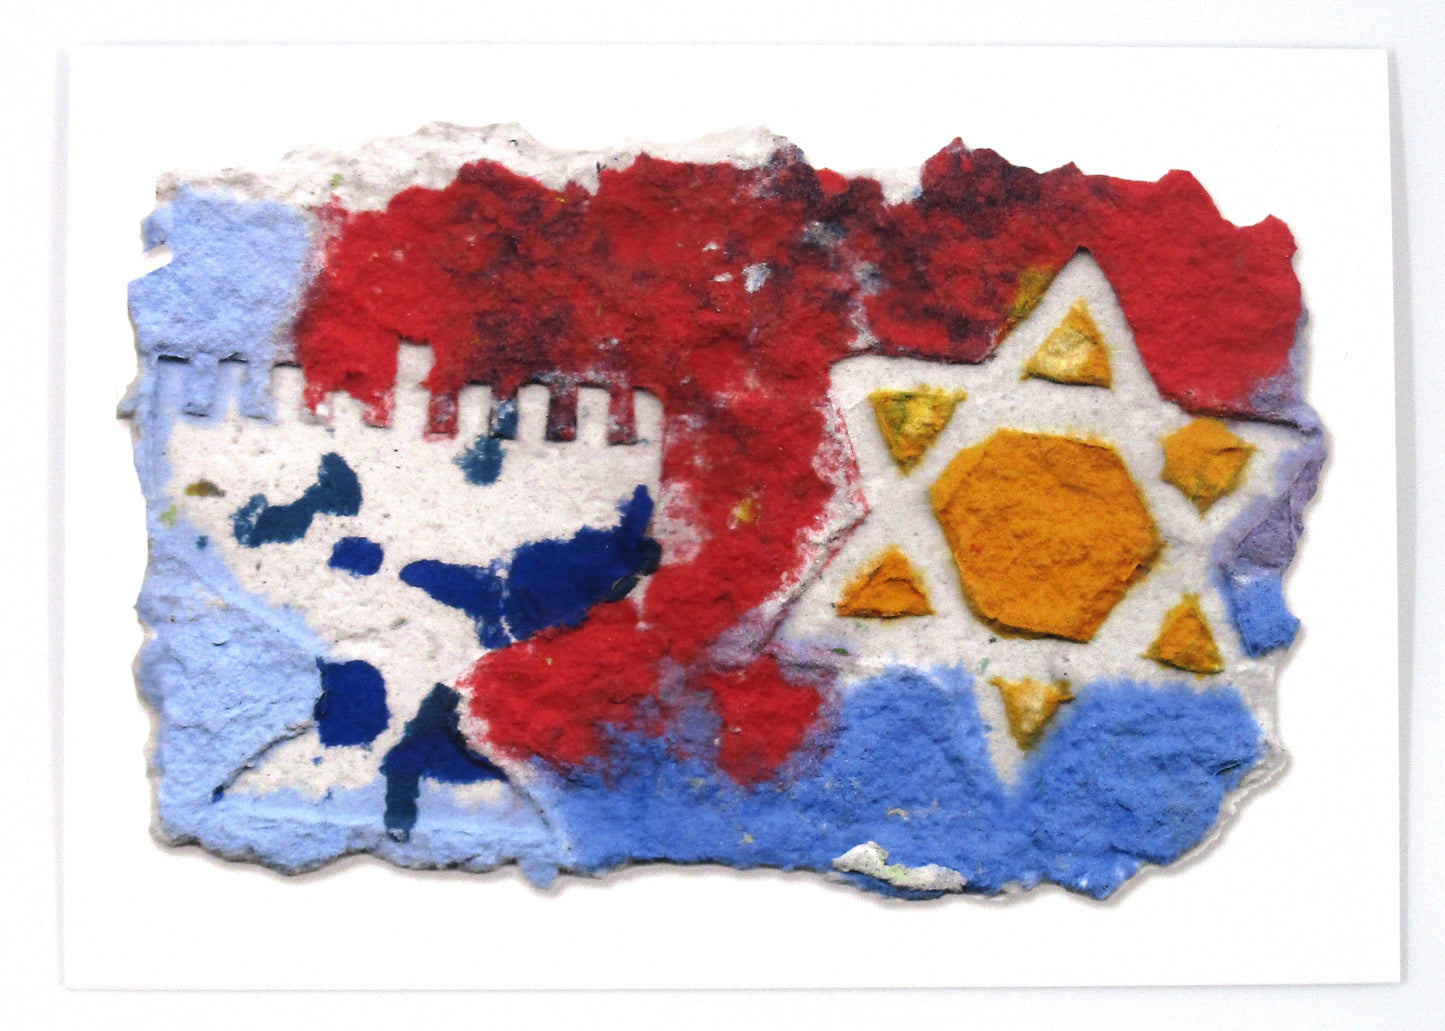 Printed card of handmade paper in shades of blue, red and orange.  Menorah and Star of David shapes, in white on top.